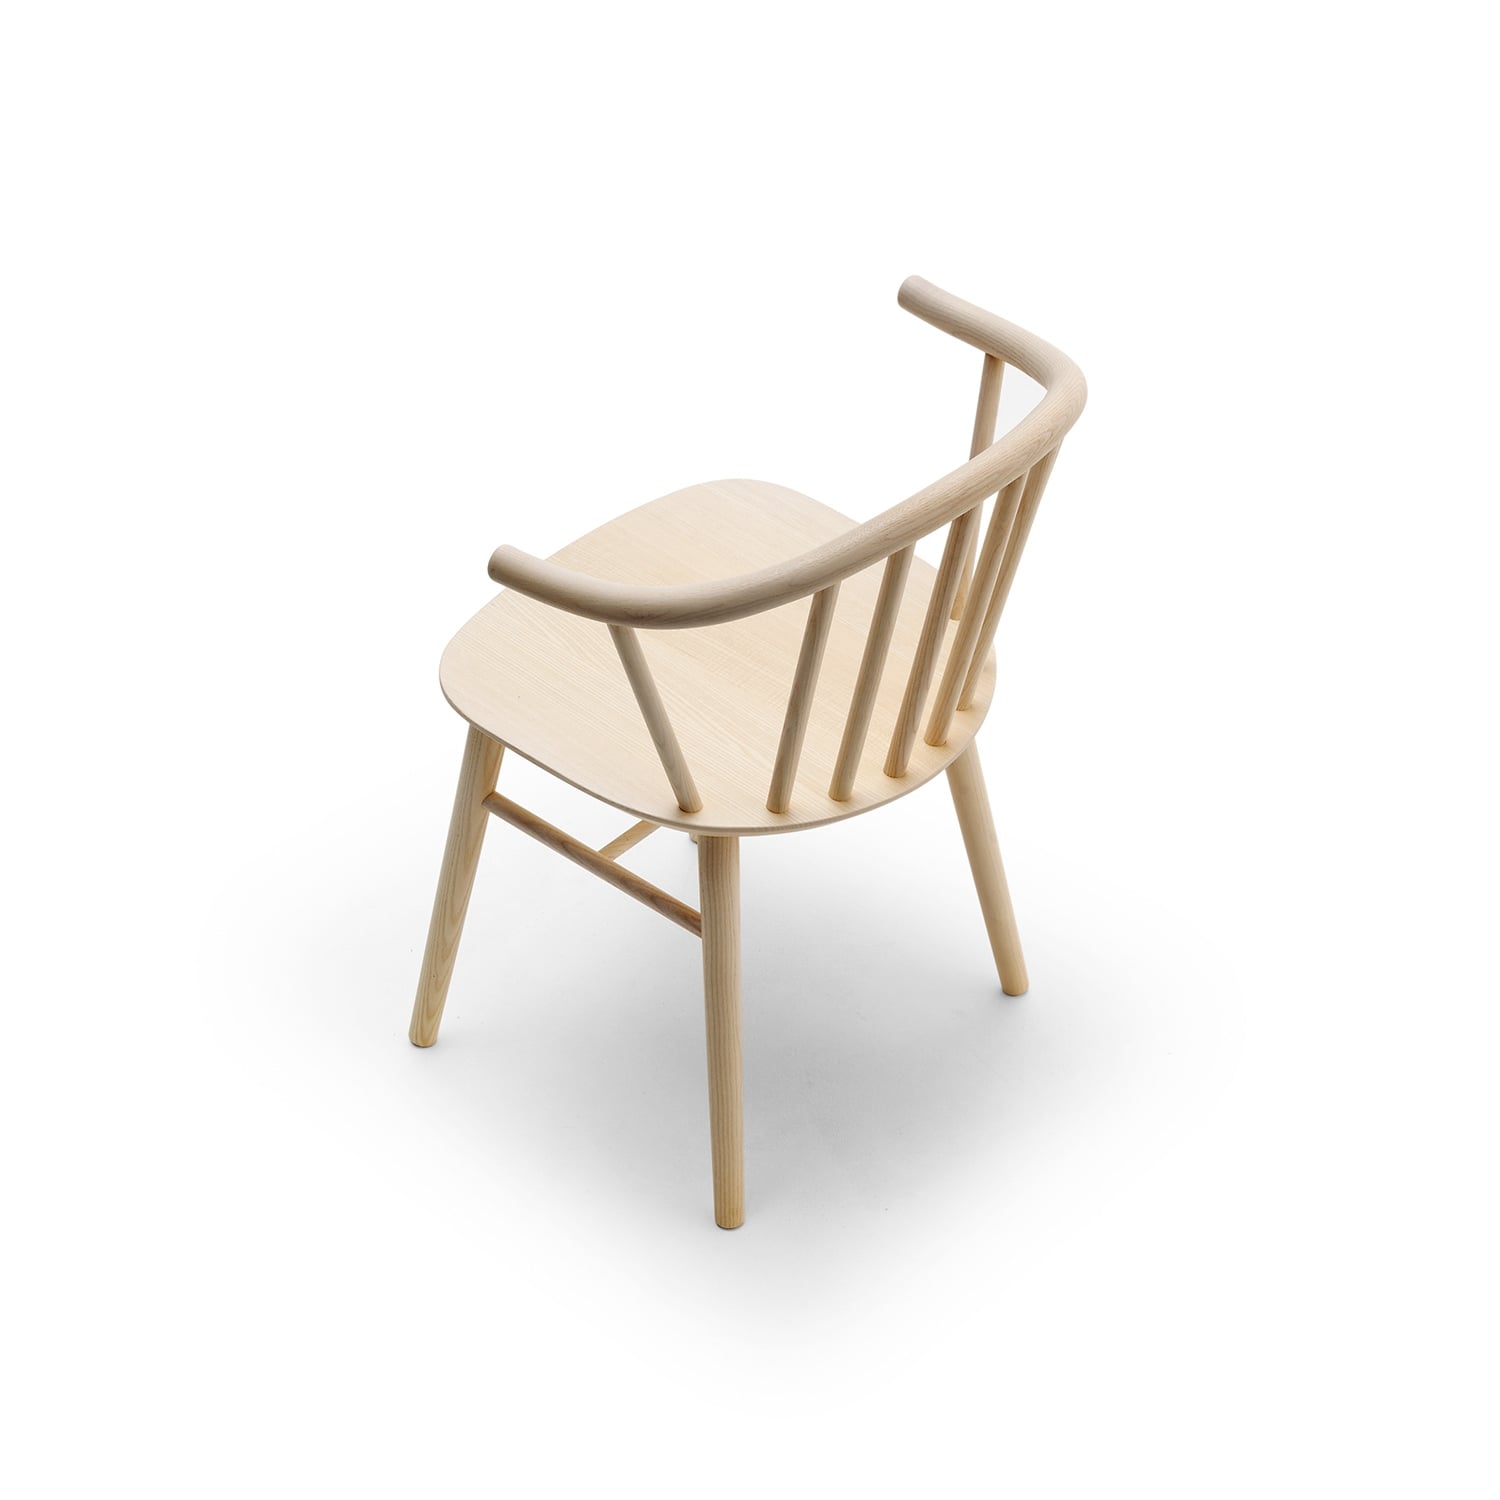 IDEE SHOP Online ONDA CHAIR Natural by Fantastico: チェア